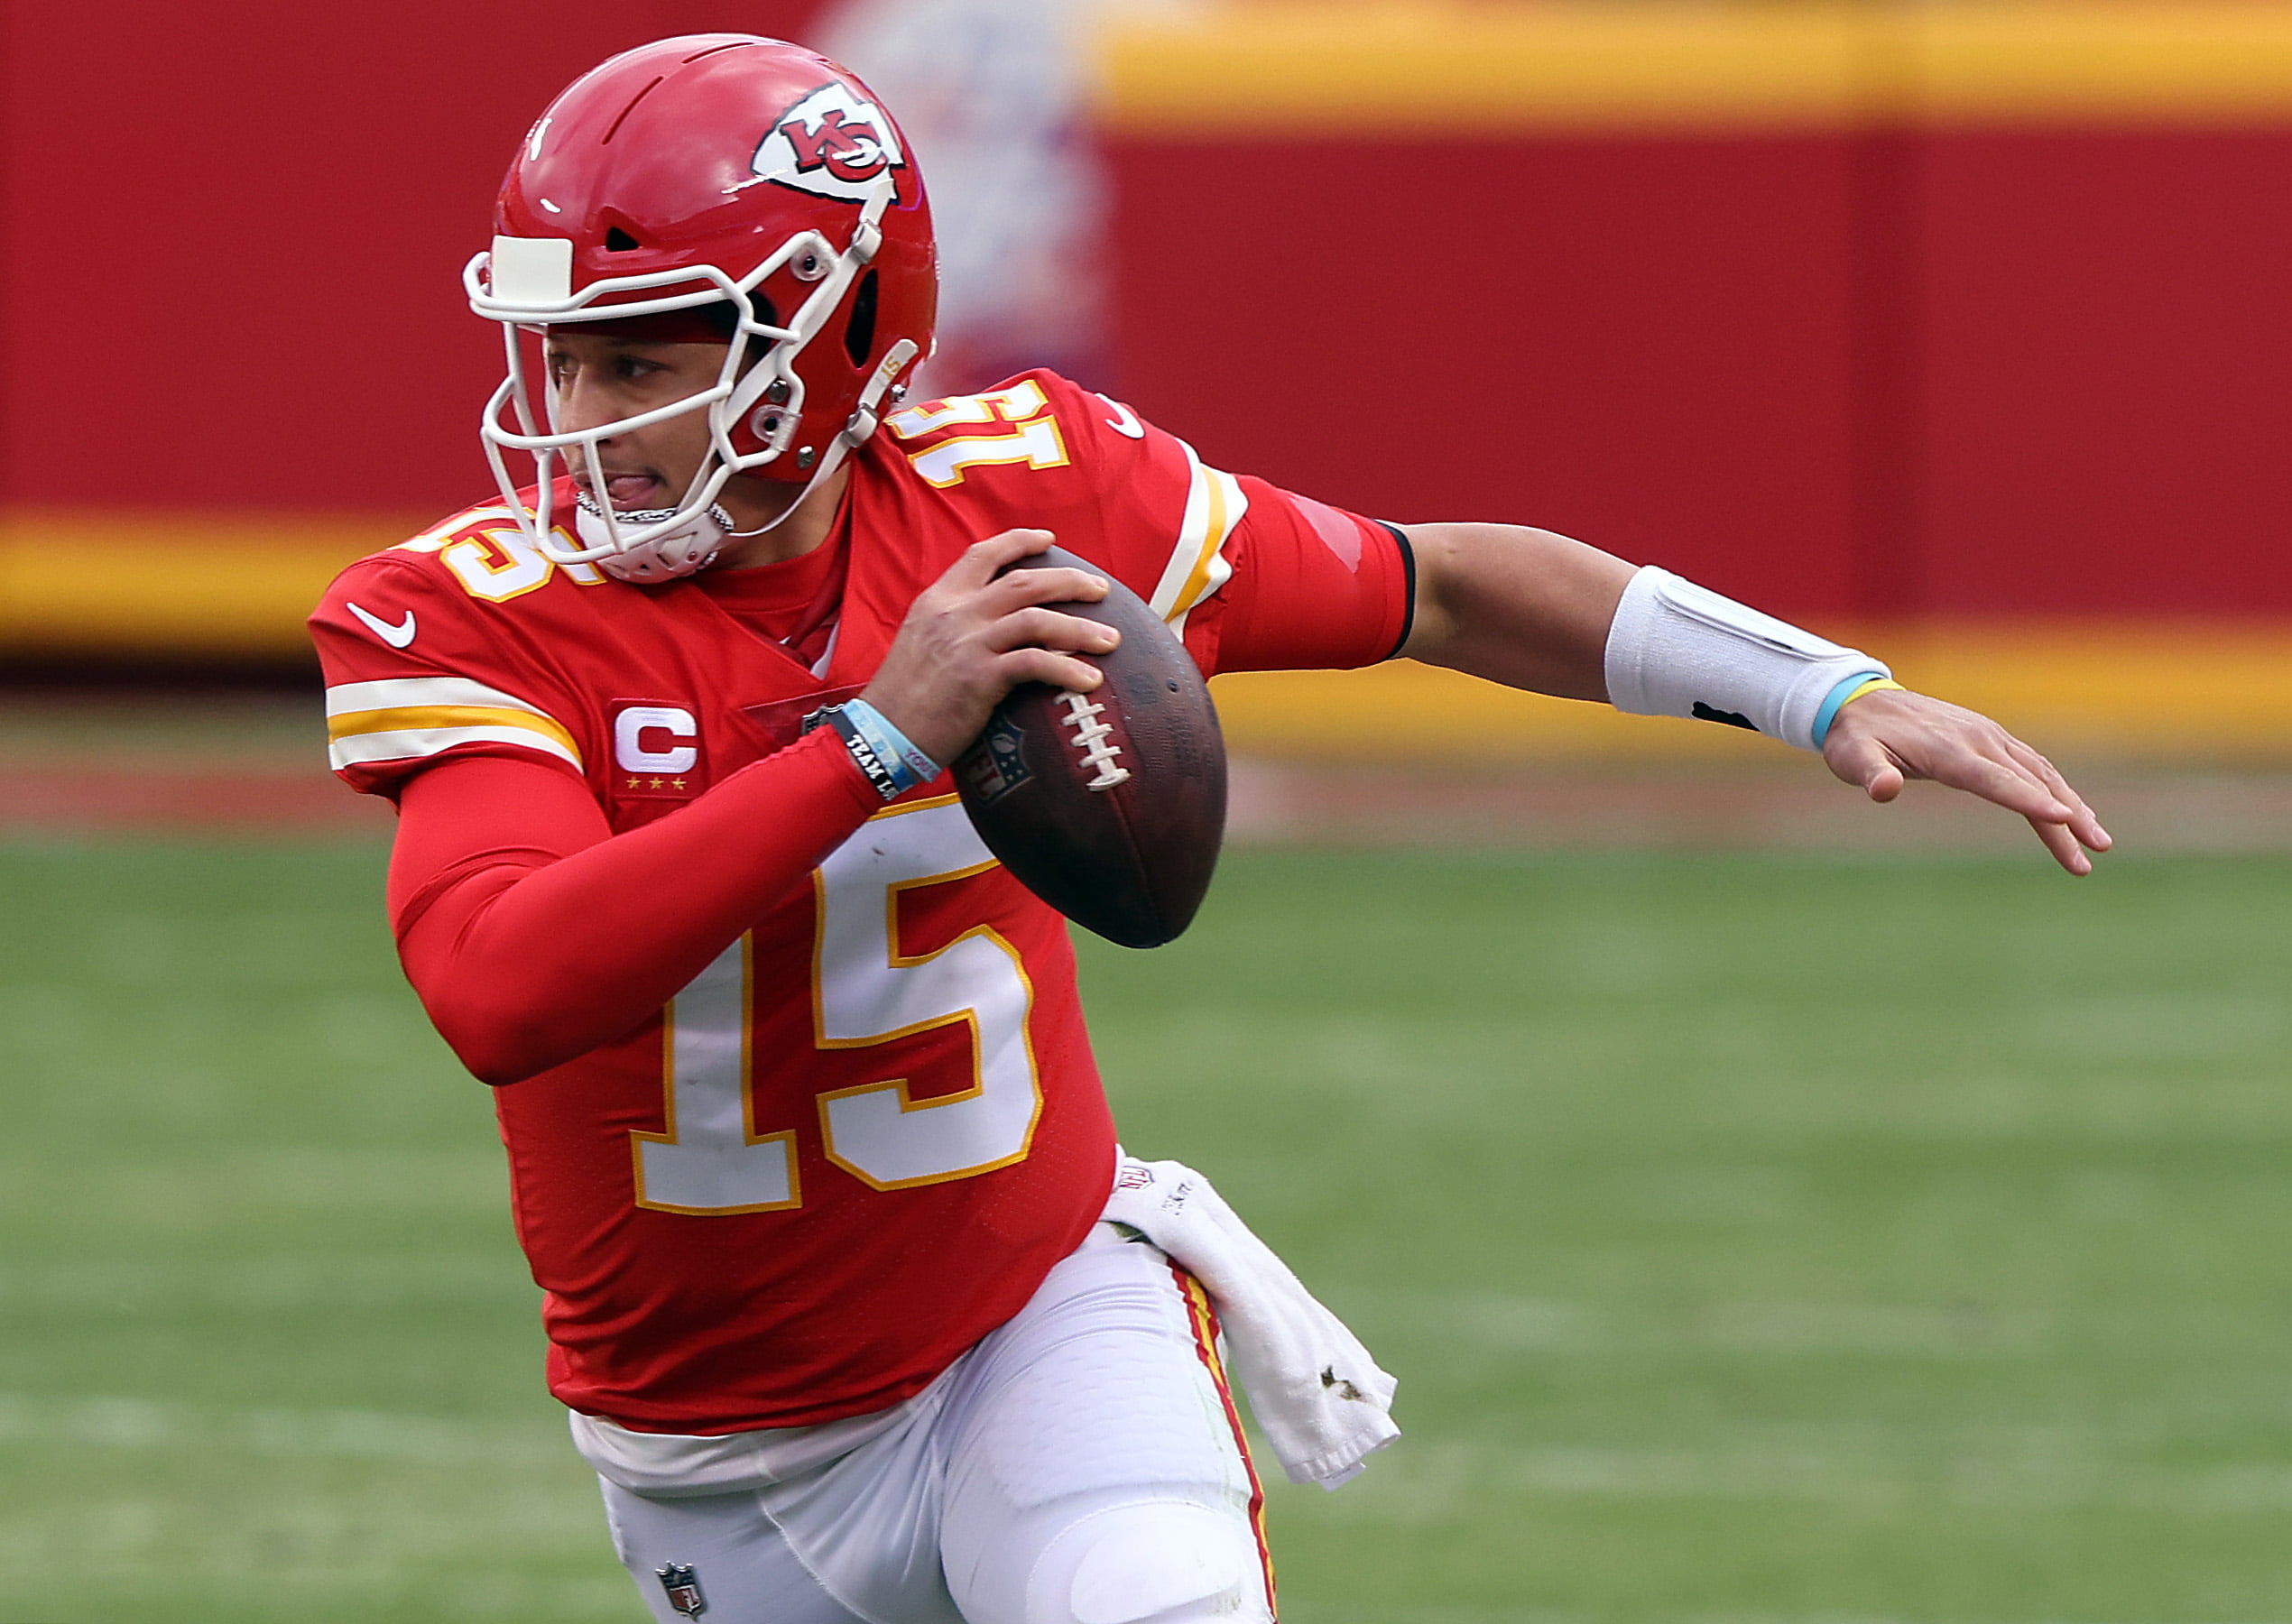 KANSAS CITY, MISSOURI - JANUARY 17:  Quarterback Patrick Mahomes #15 of the Kansas City Chiefs scrambles during the AFC Divisional Playoff game against the Cleveland Browns at Arrowhead Stadium on January 17, 2021 in Kansas City, Missouri. (Photo by Jamie Squire/Getty Images)